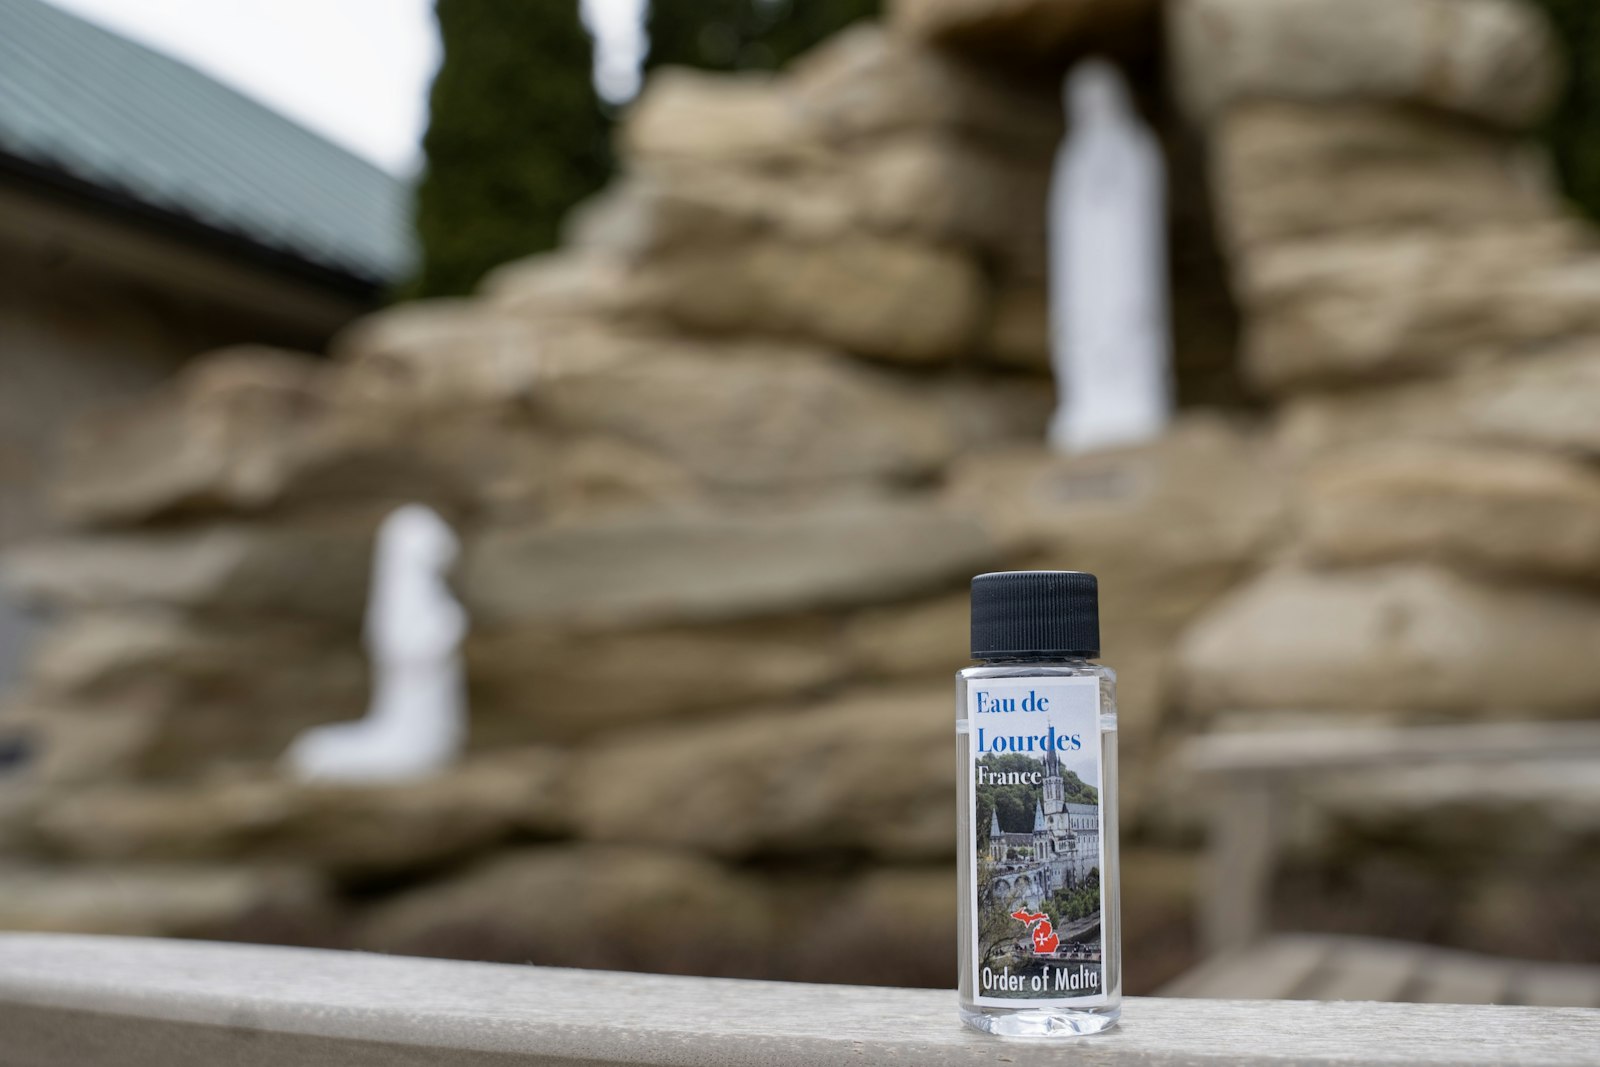 A vial of holy water given out during the Mass is pictured in front of a newly installed grotto dedicated to Our Lady of Lourdes at the cathedral. During the pandemic, Archbishop Vigneron pledged to build the grotto as a "lasting sign" of the Archdiocese of Detroit's gratitude to her protection, a project that is nearly completed and will be dedicated on May 12.